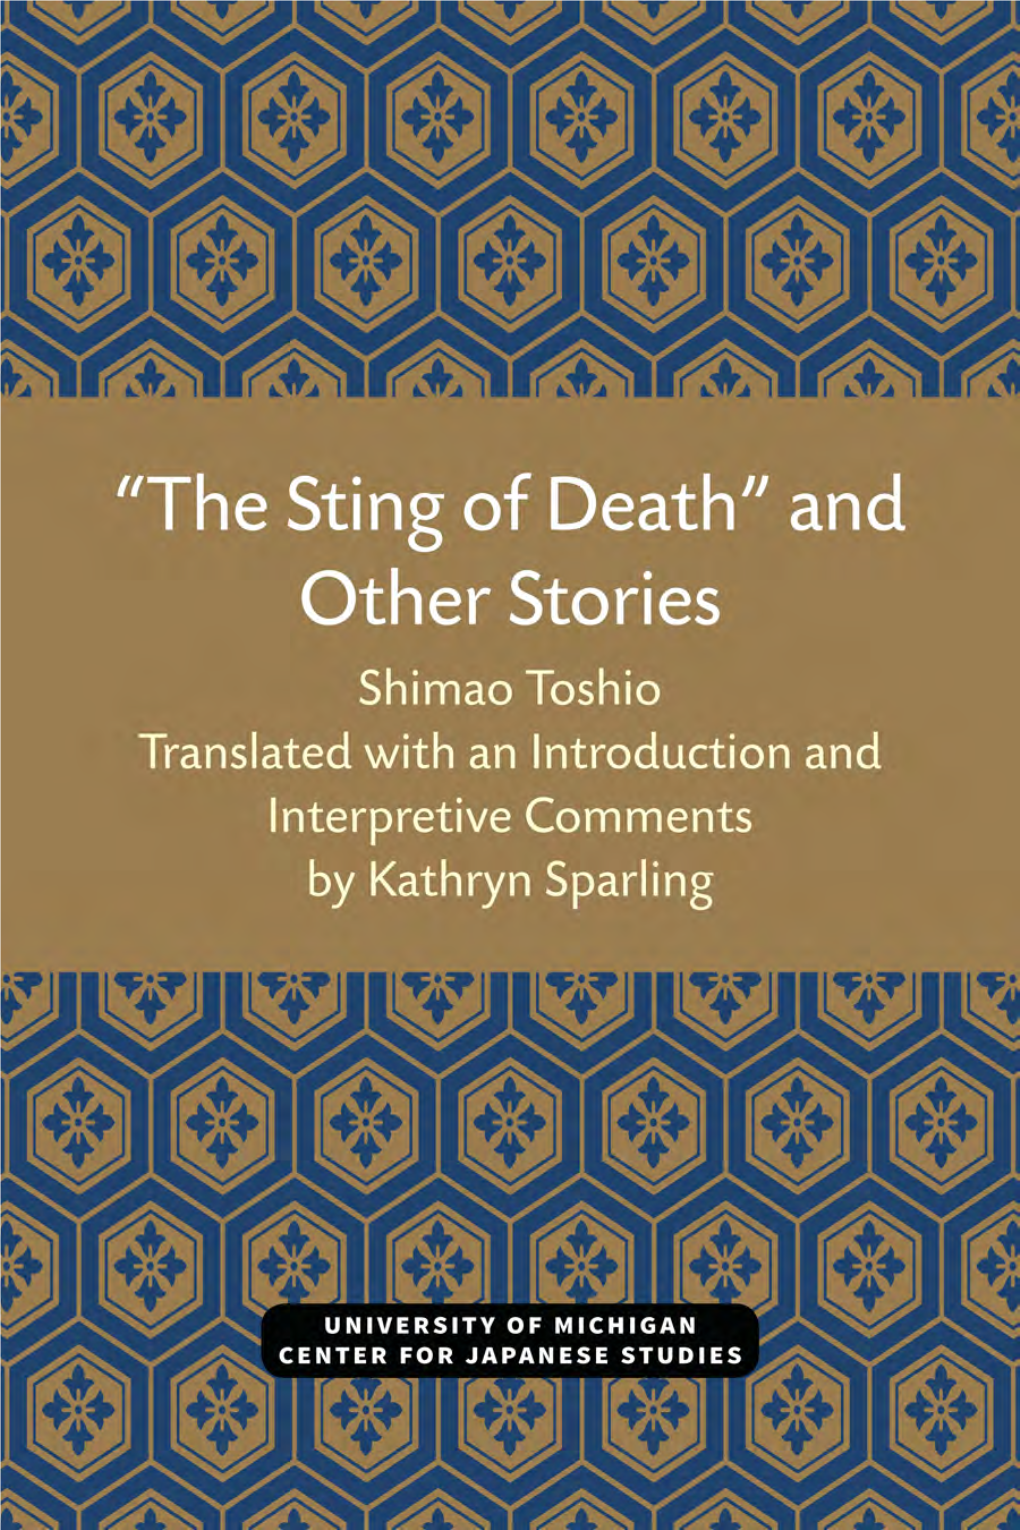 “The Sting of Death” and Other Stories